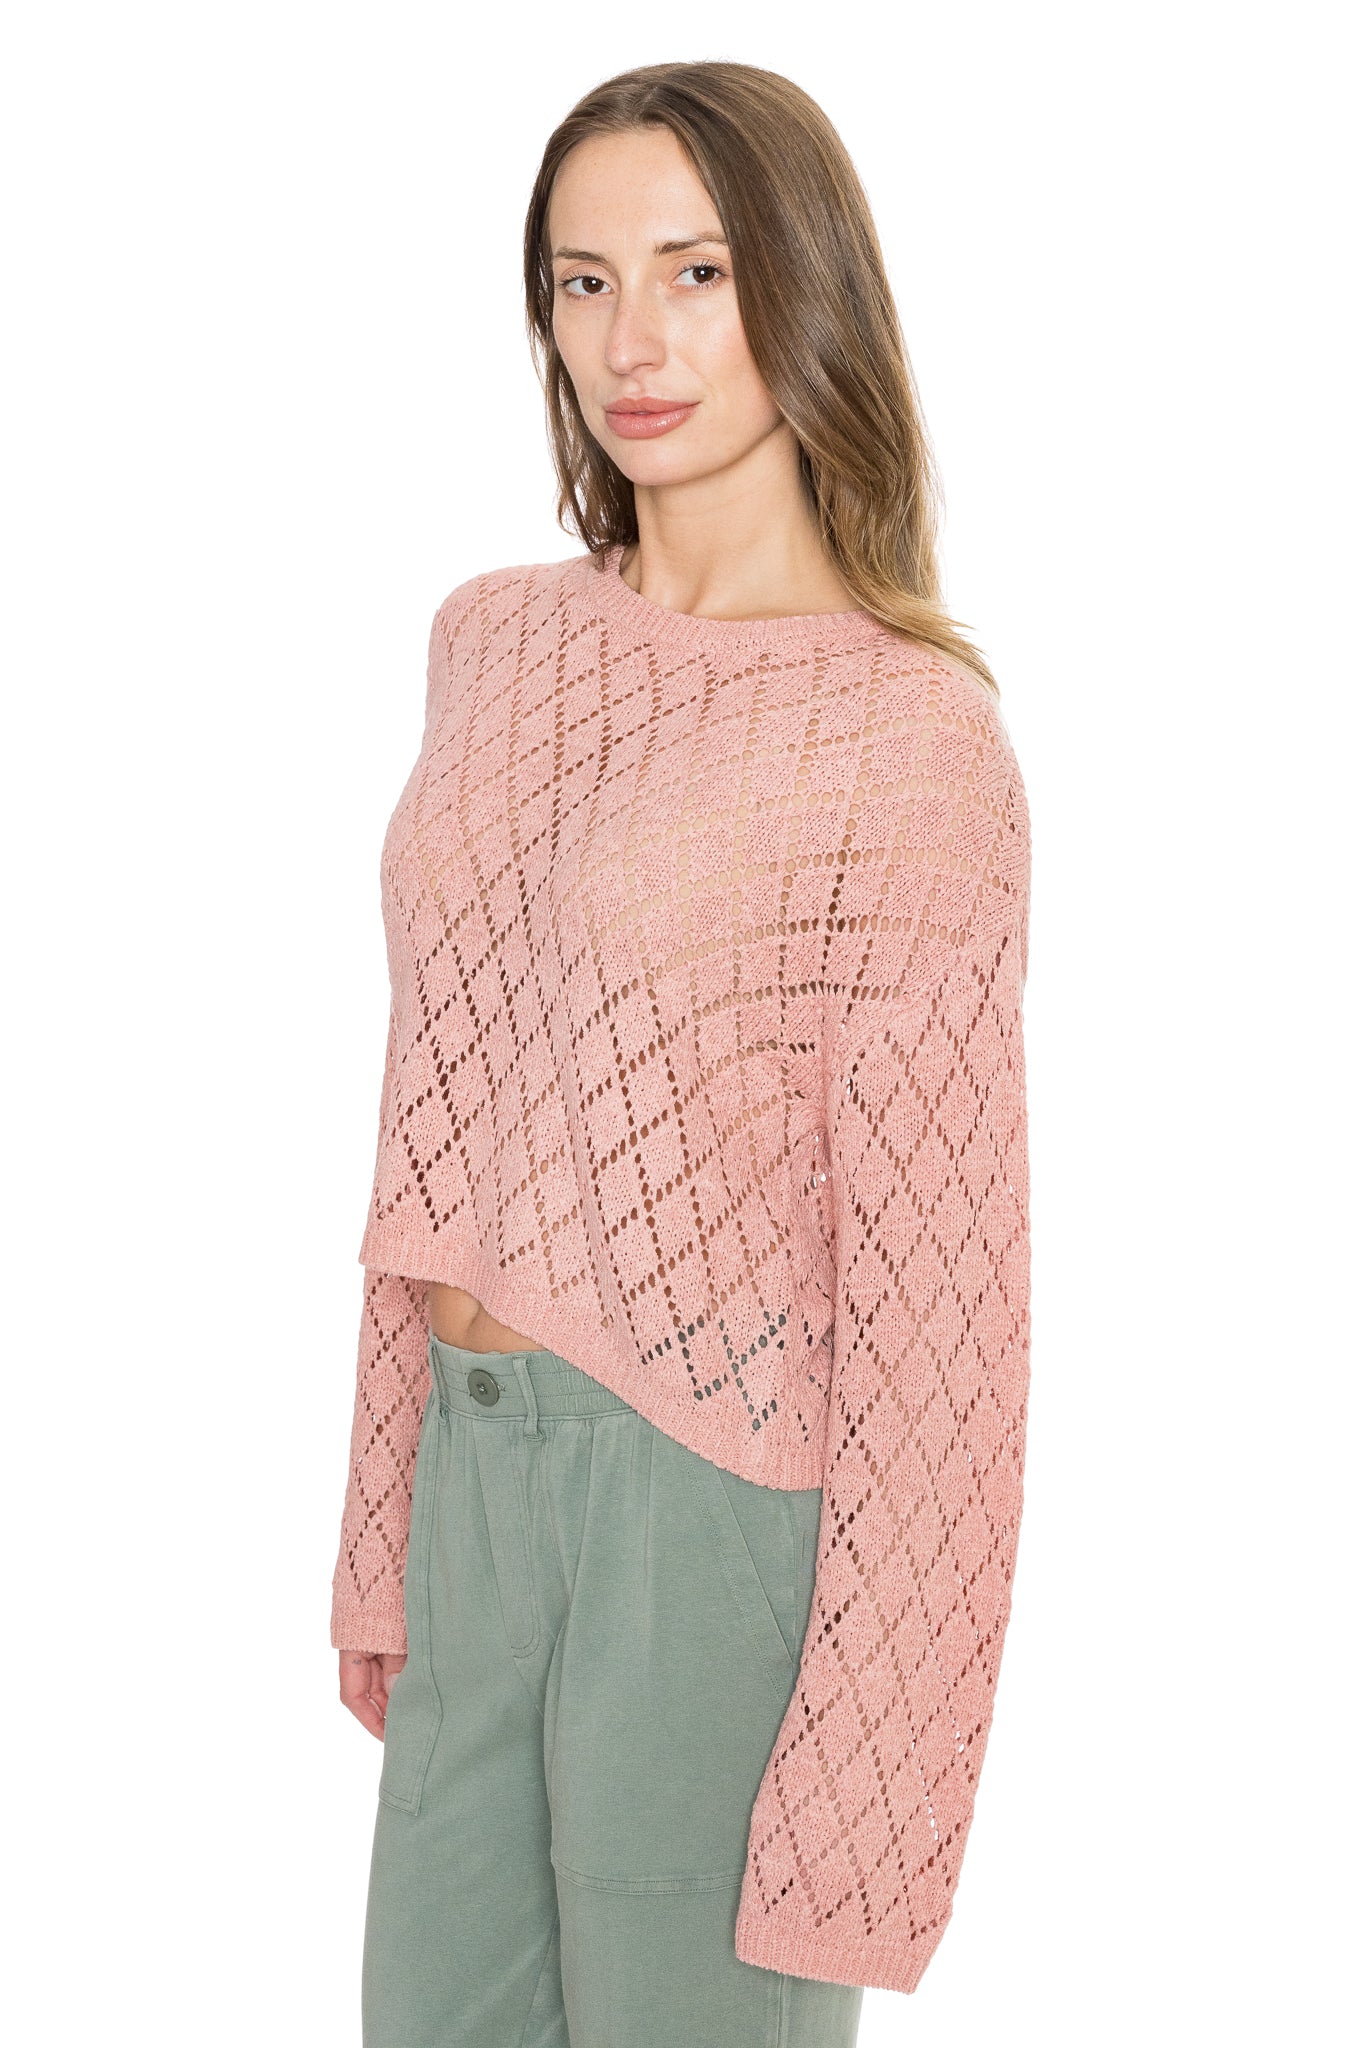 Makenna Cropped Sweater by Z Supply